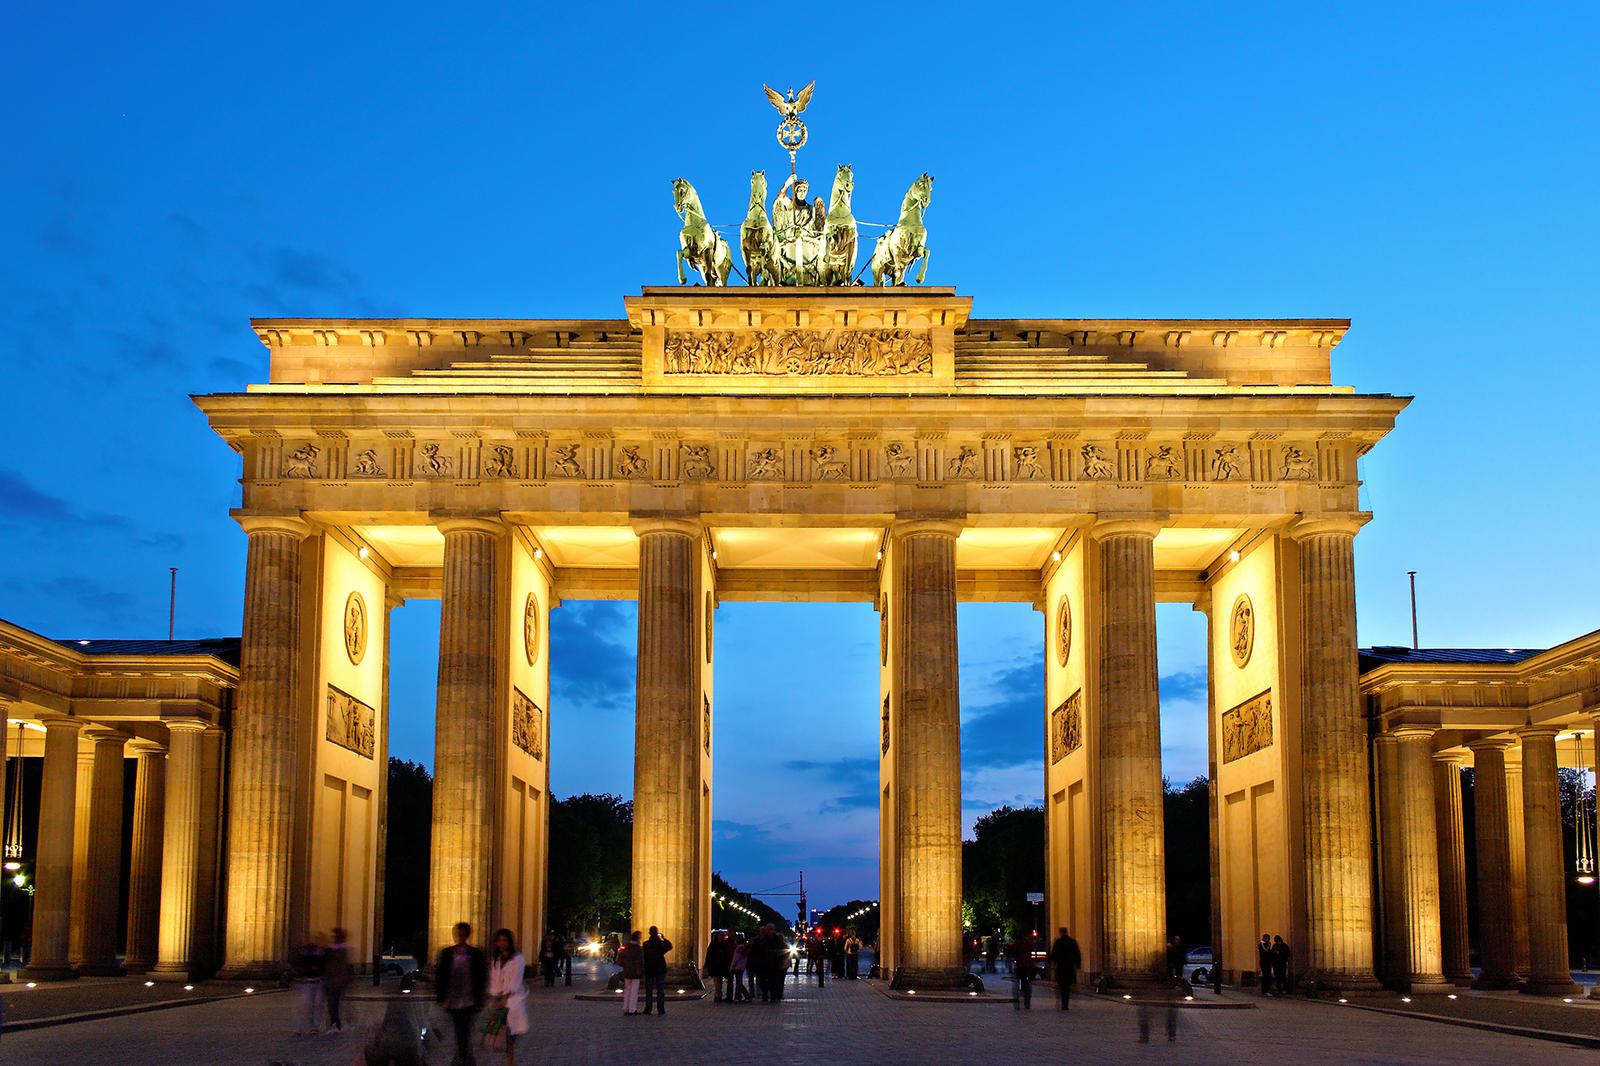 If You Can Score More Than 18 on This Famous Landmarks Quiz, You Probably Know All About the World Brandenburg Gate, Berlin, Germany